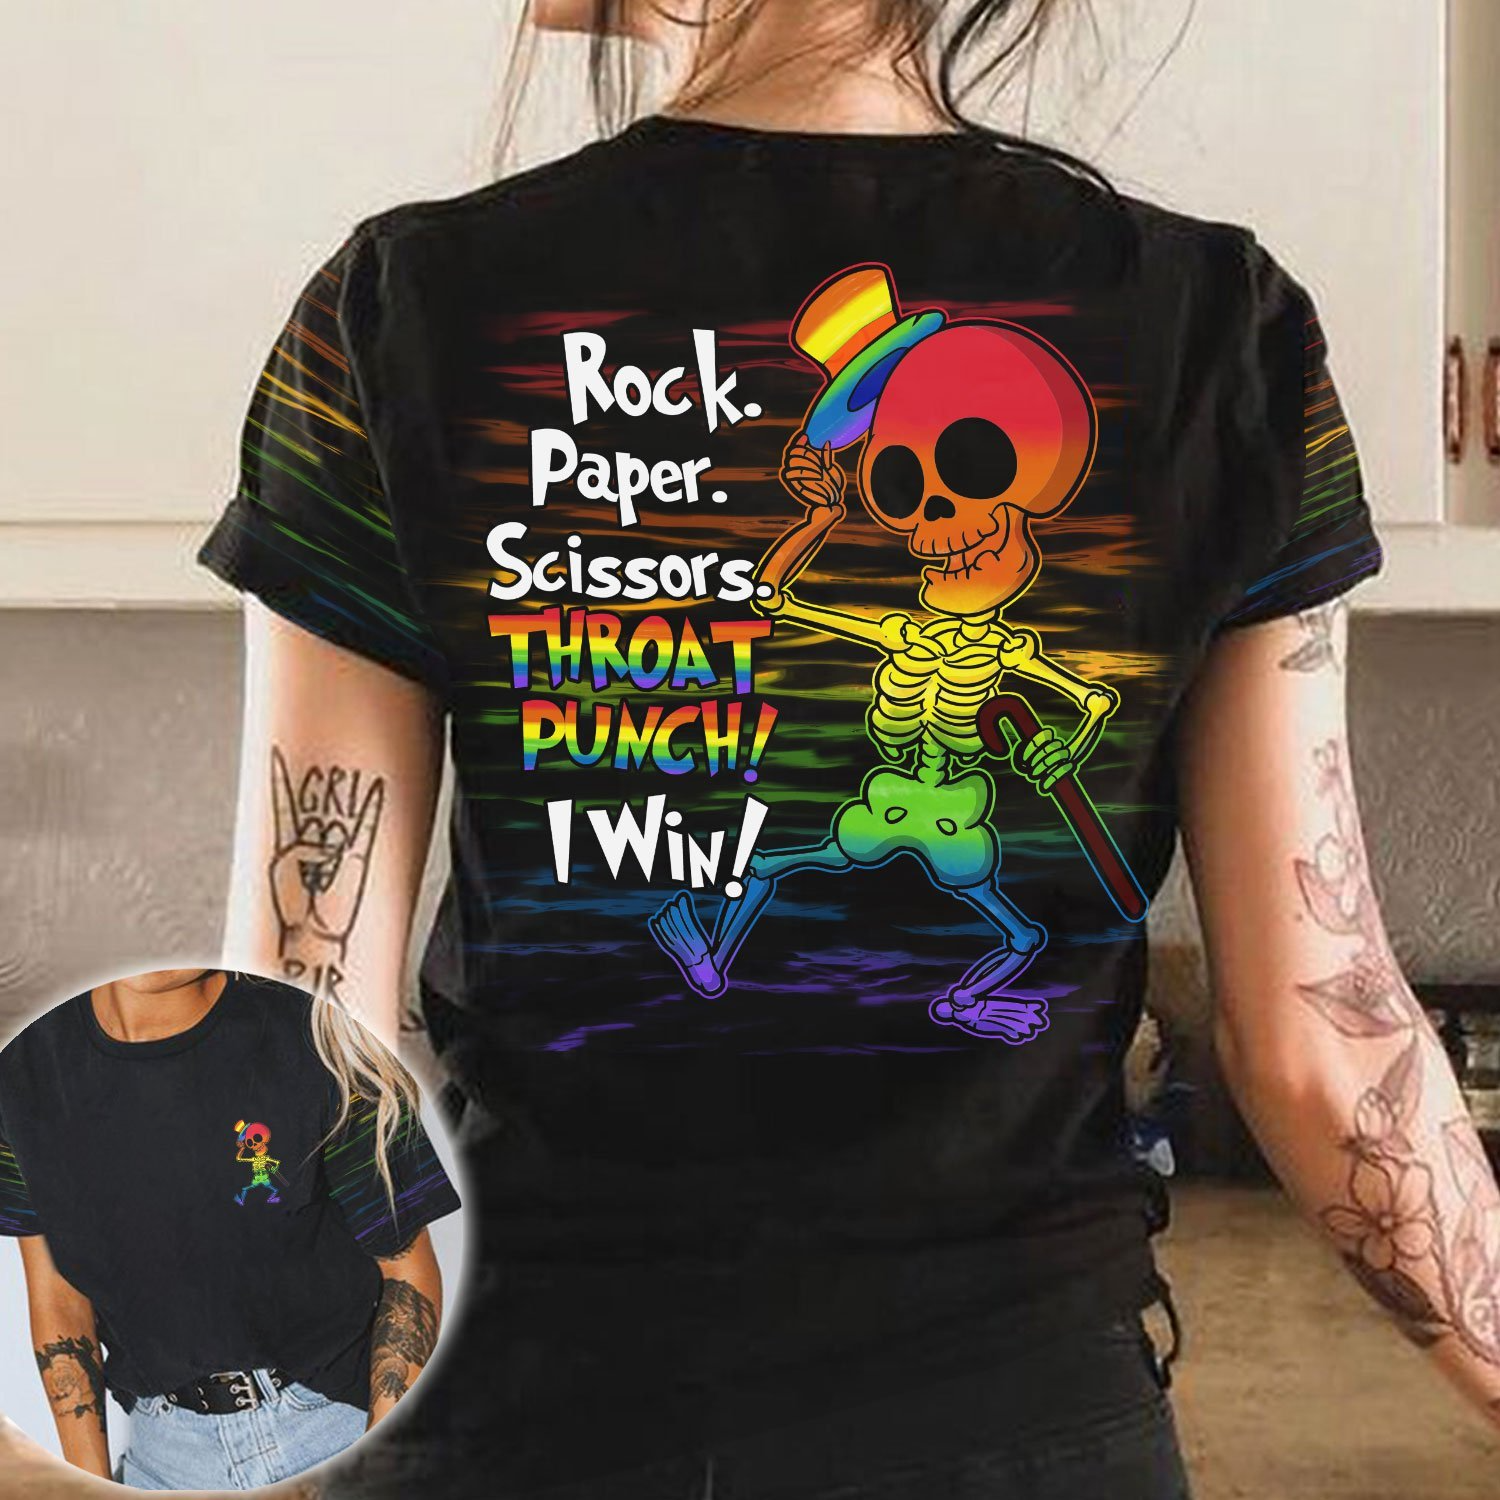 Funny LGBT Shirt/ Rock Skeleton Gay Pride Shirt/ Gift To Lesbian/ Gift For Gay On Pride Month